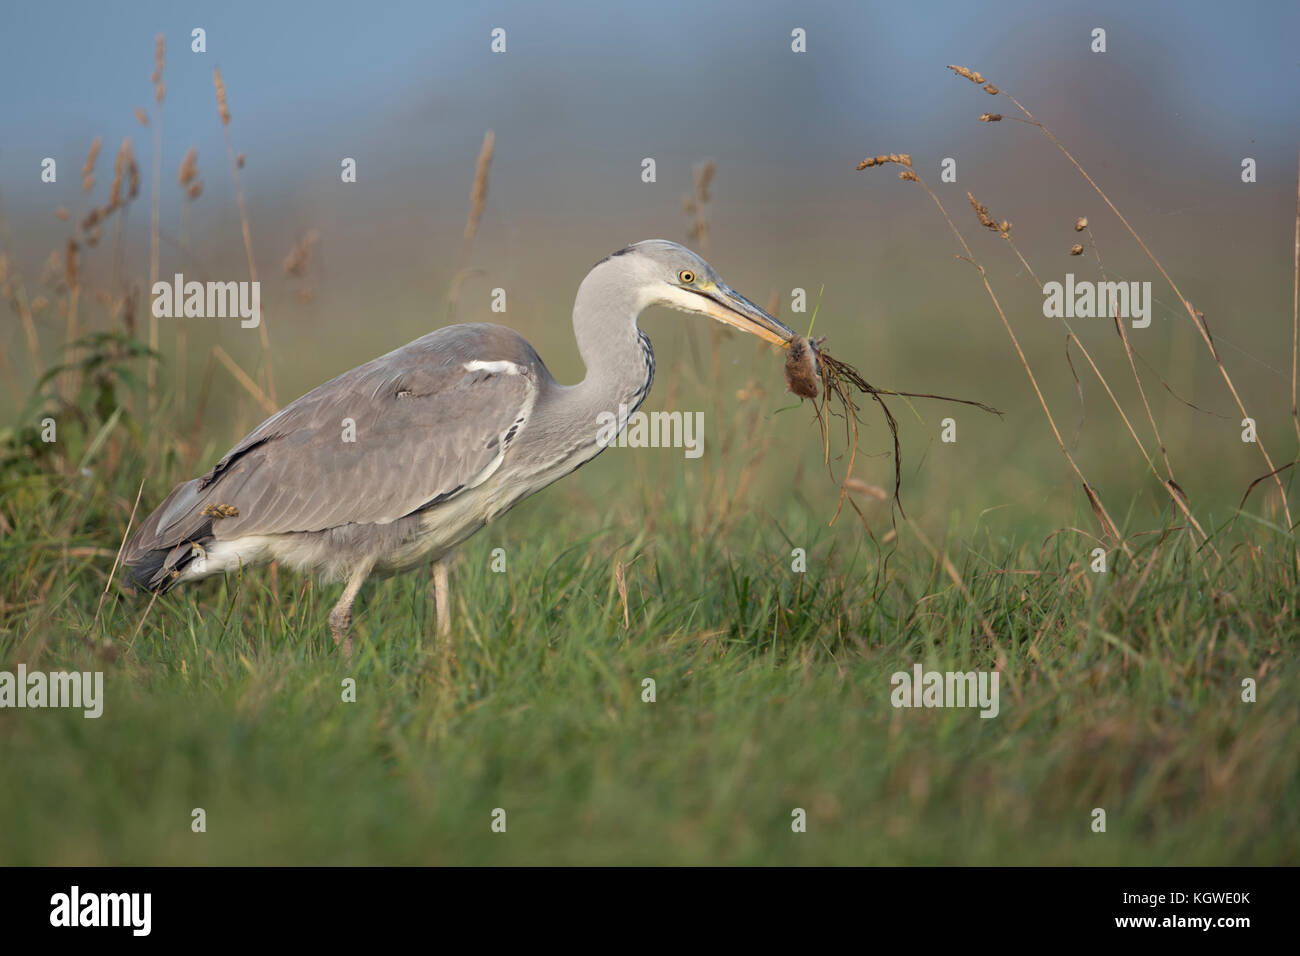 Grey Heron ( Ardea cinerea ) walking through a meadow, with rodent / mouse in its beak, feeding on prey, successful hunter, wildlife, Europe. Stock Photo